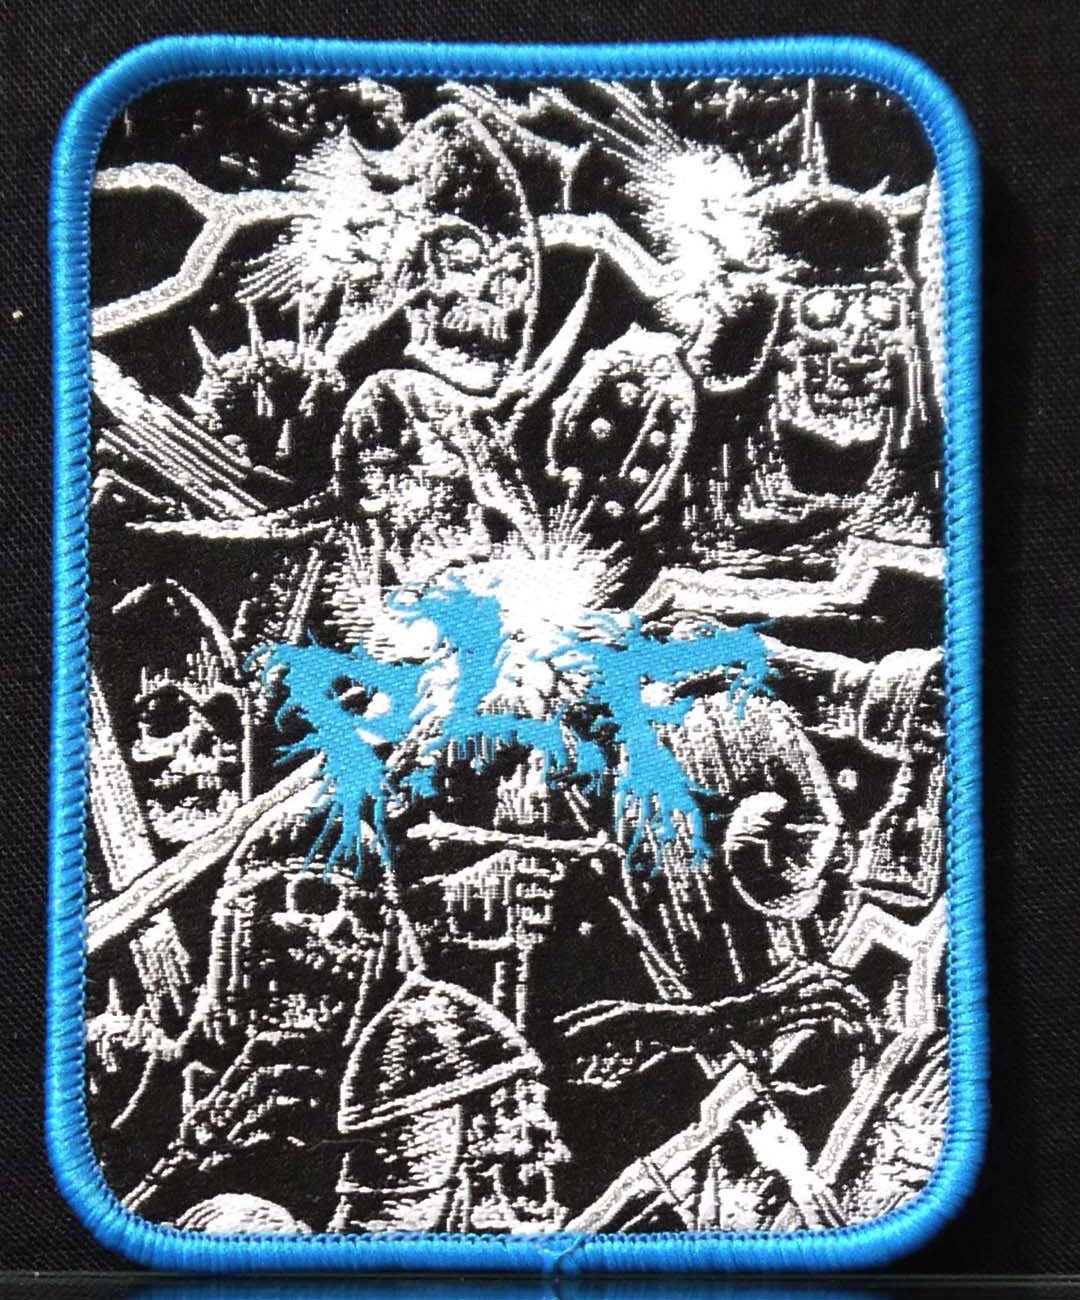 P.L.F - Devious Persecution And Wholesale Slaughter Woven Patch